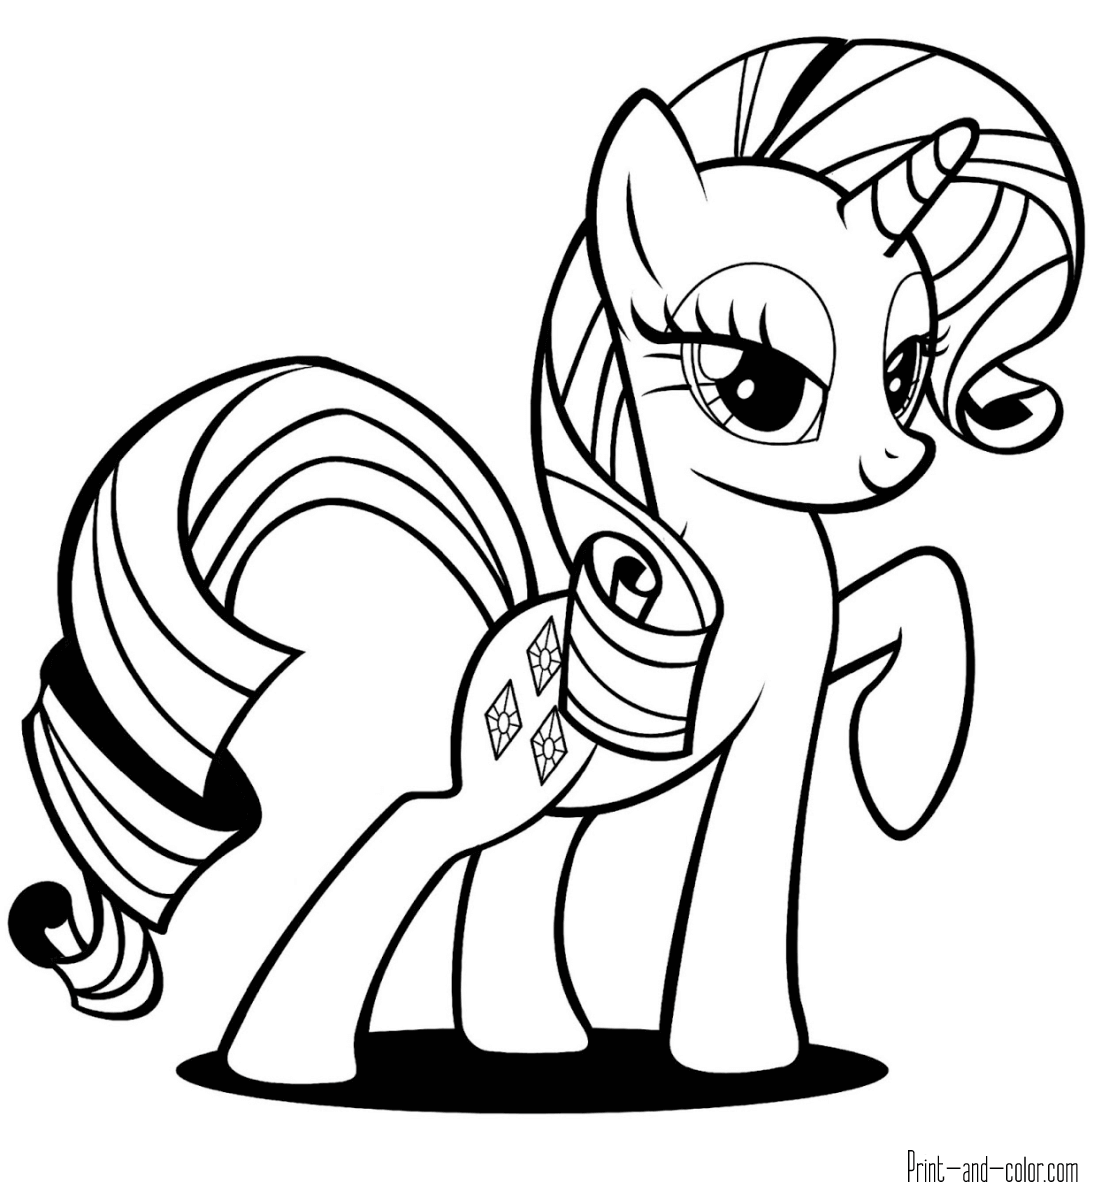 coloring pages of my little pony free printable my little pony coloring pages for kids pony my coloring pages little of 